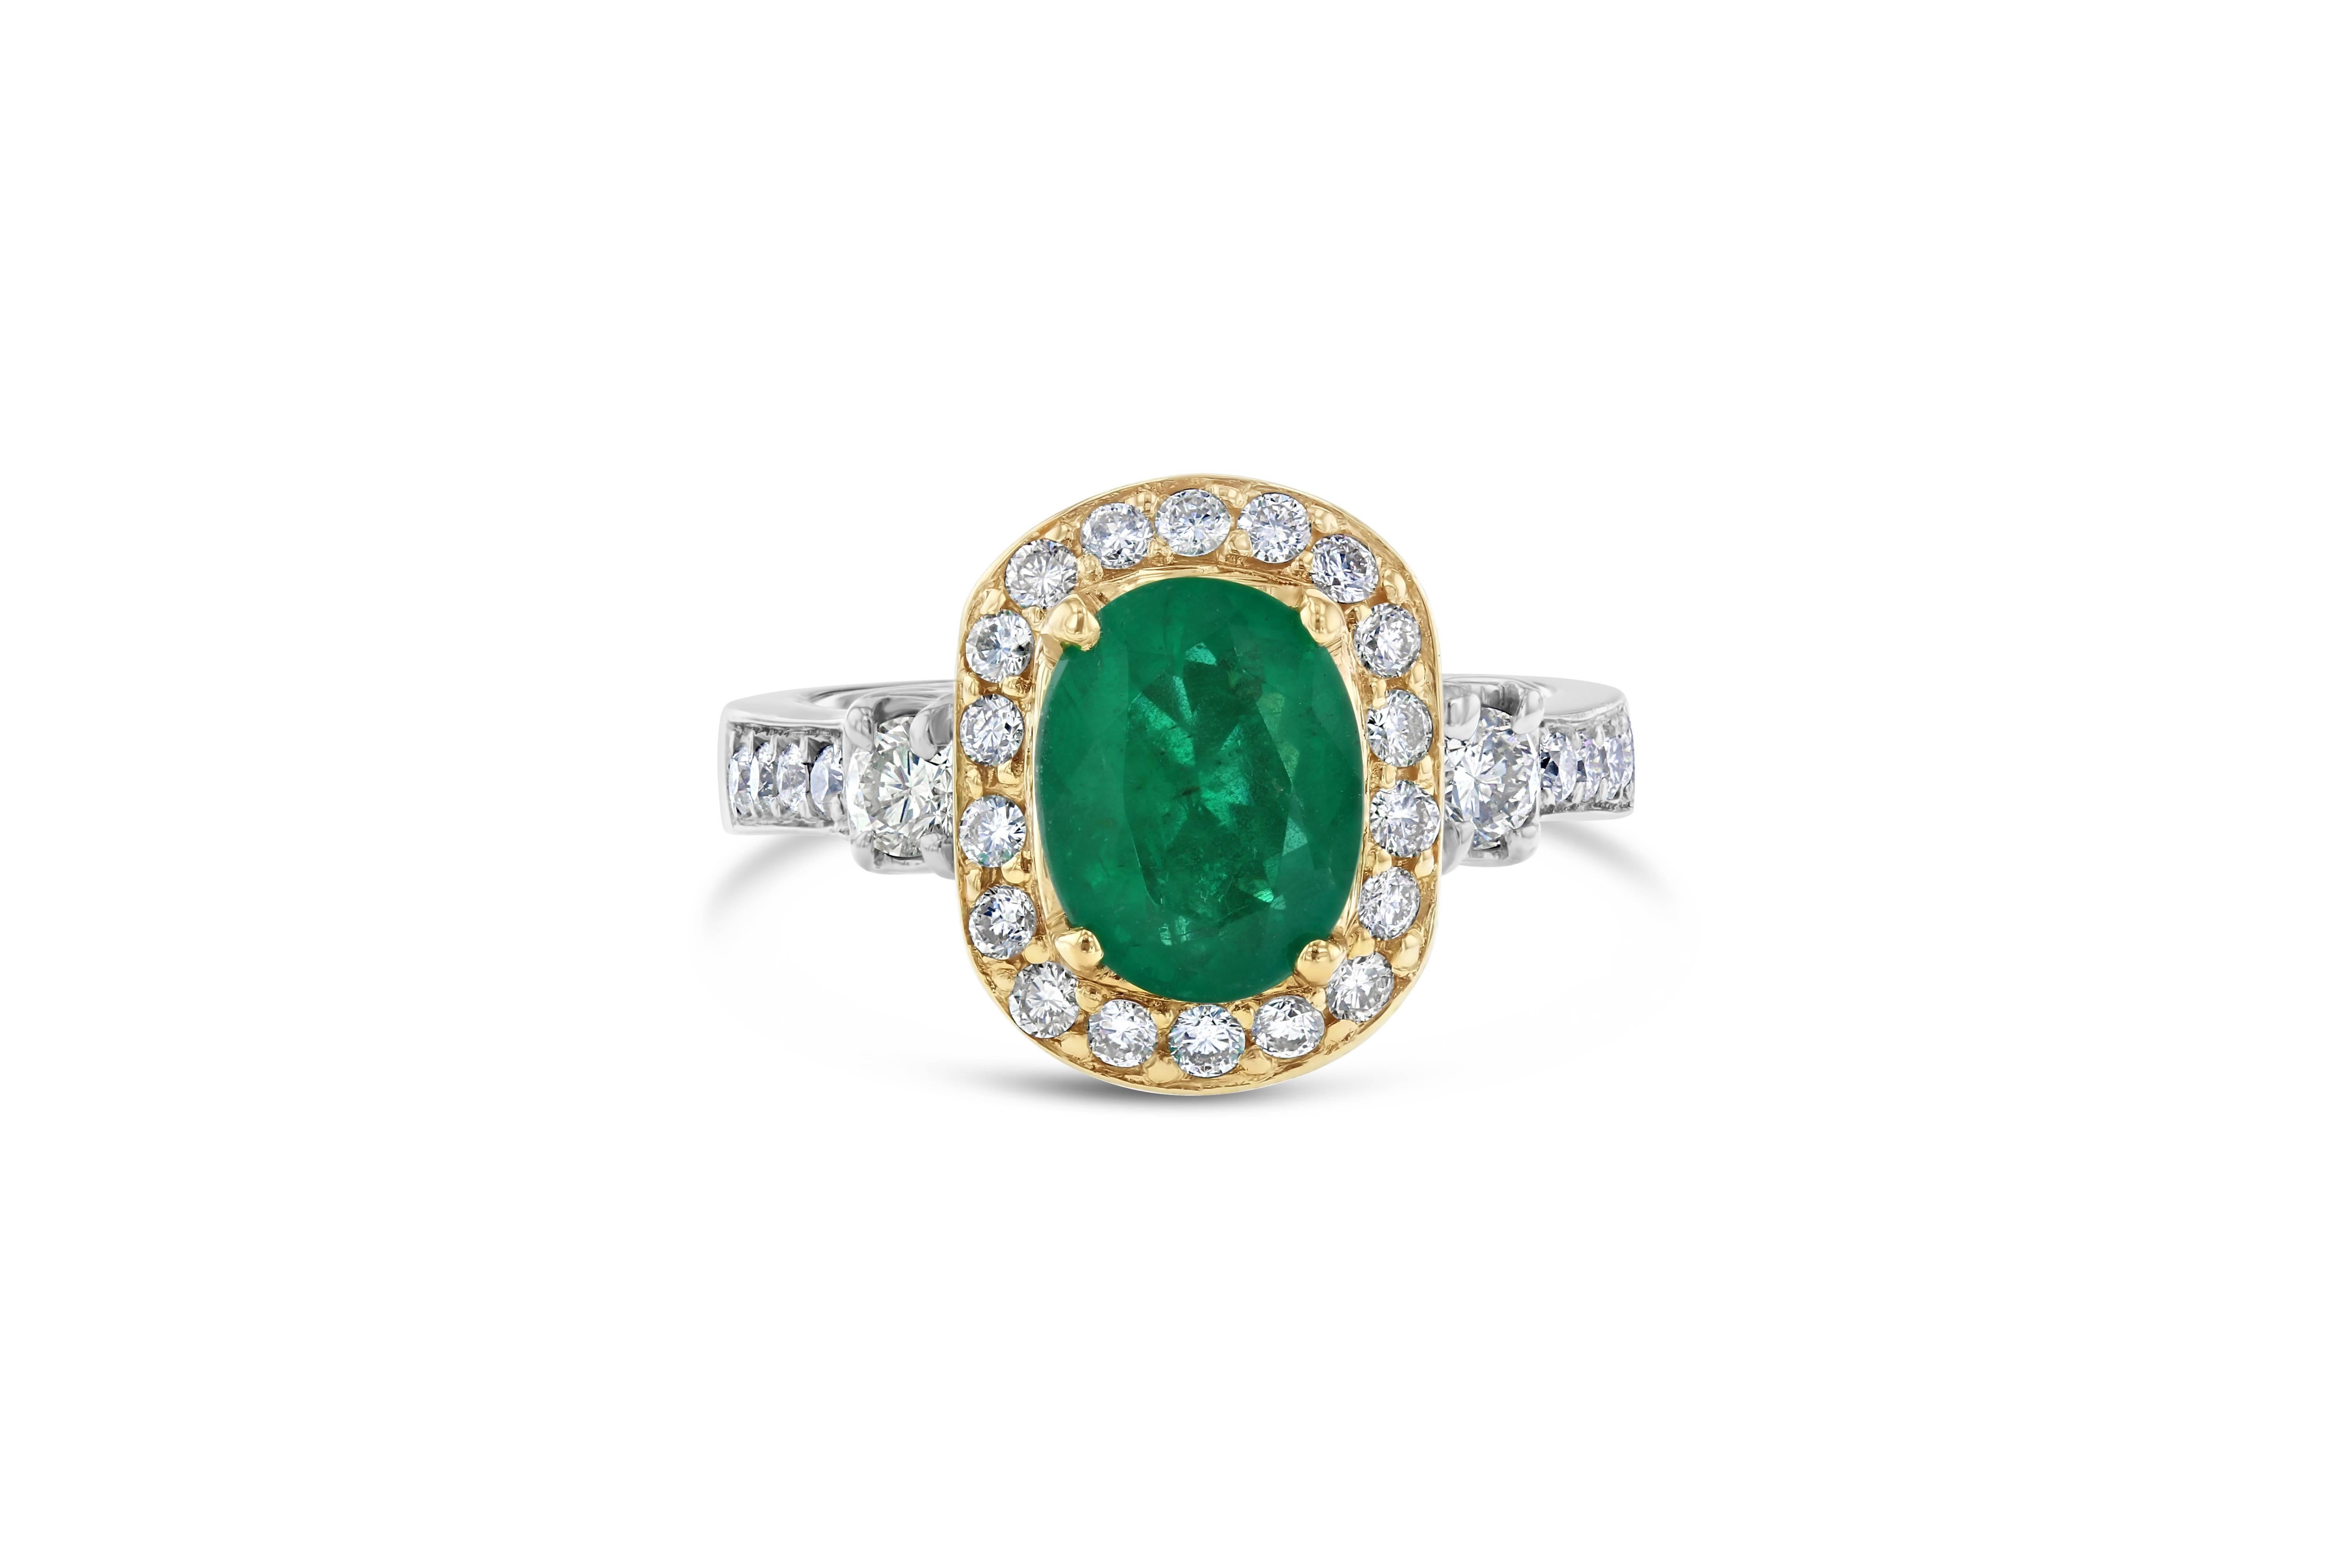 A beautiful vintage, two-tone setting holding a magnificent natural Emerald that weighs 1.68 Carats with 28 Round Cut Diamonds weighing 0.75 Carats. The two-tone setting is 14K White and Yellow Gold and is 8.1 grams. The ring is a size 7 and can be